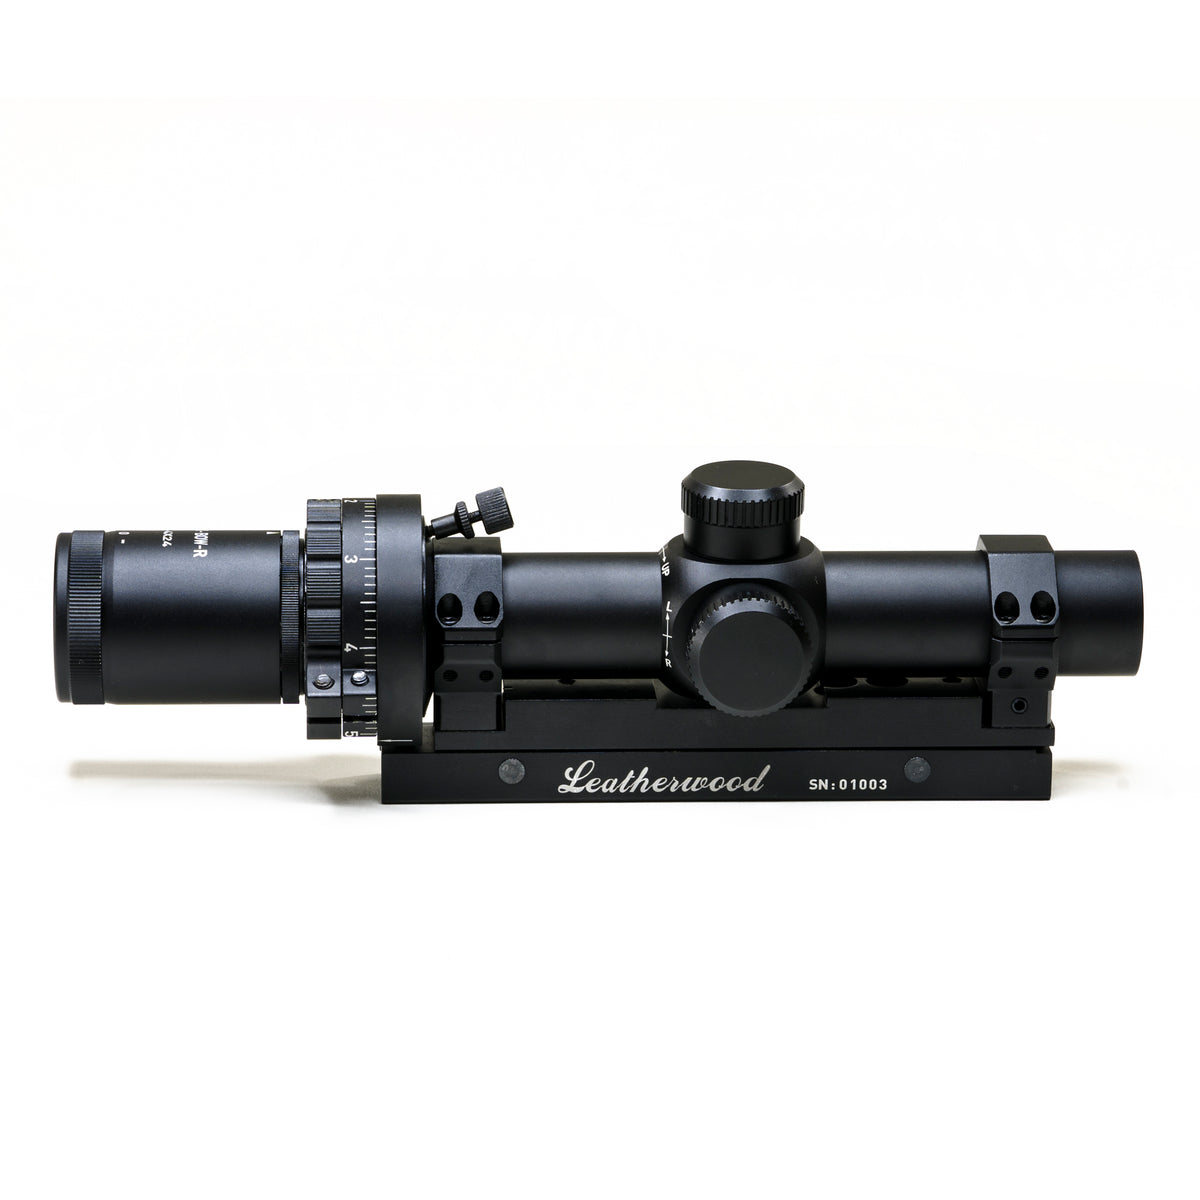 ART X-BOW Crossbow Scope Side View